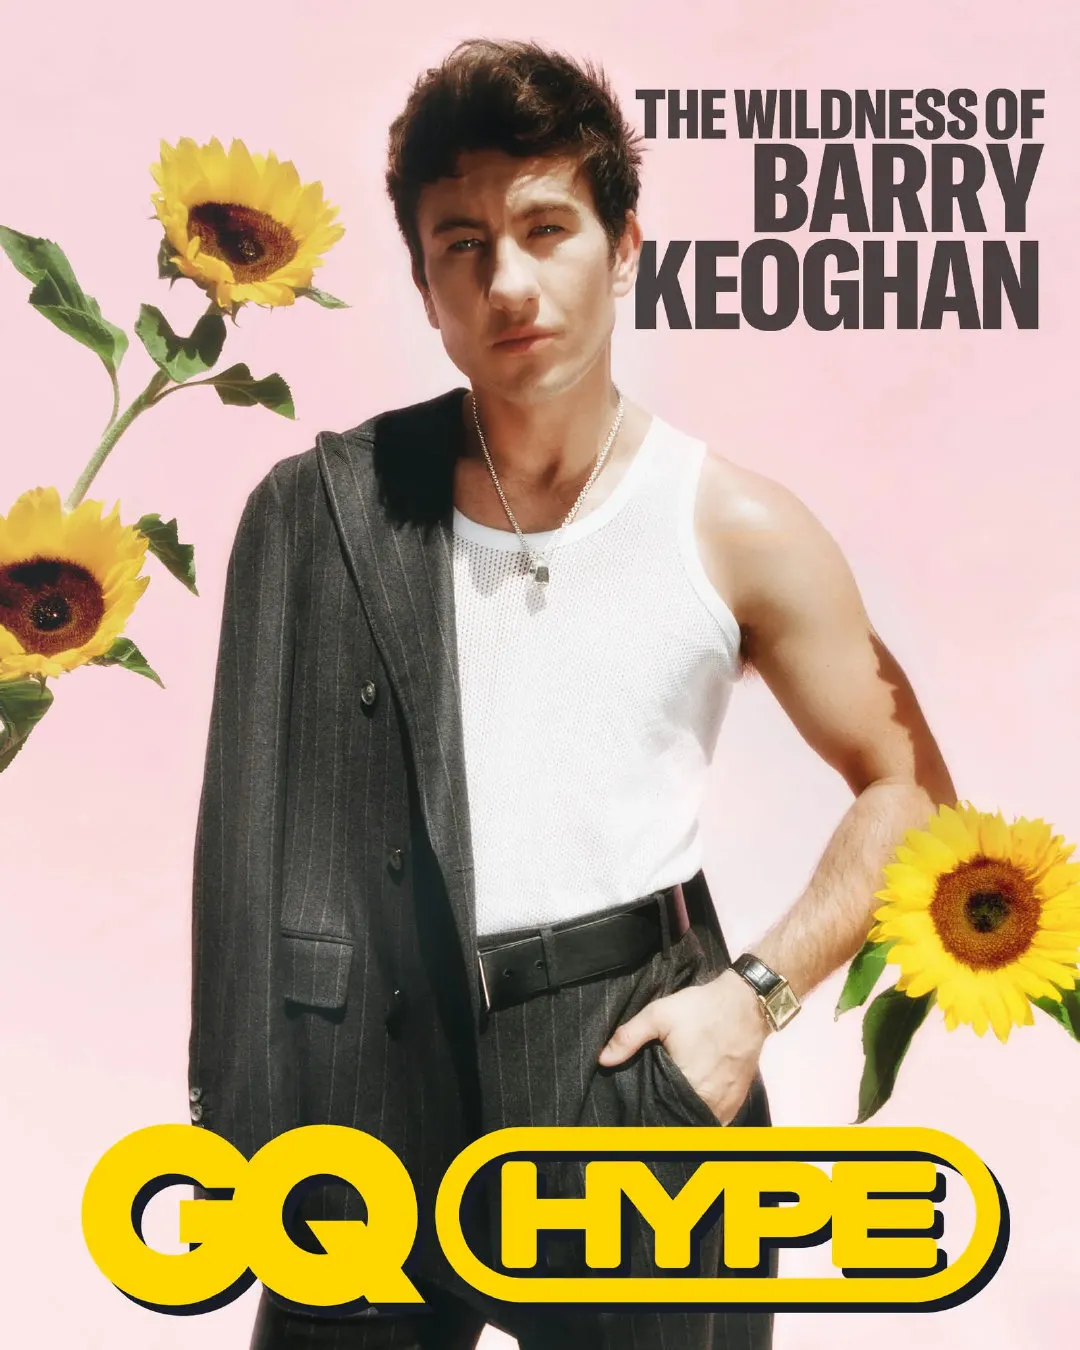 Barry Keoghan, new photo for 'GQ Hype' magazine​​​ | FMV6